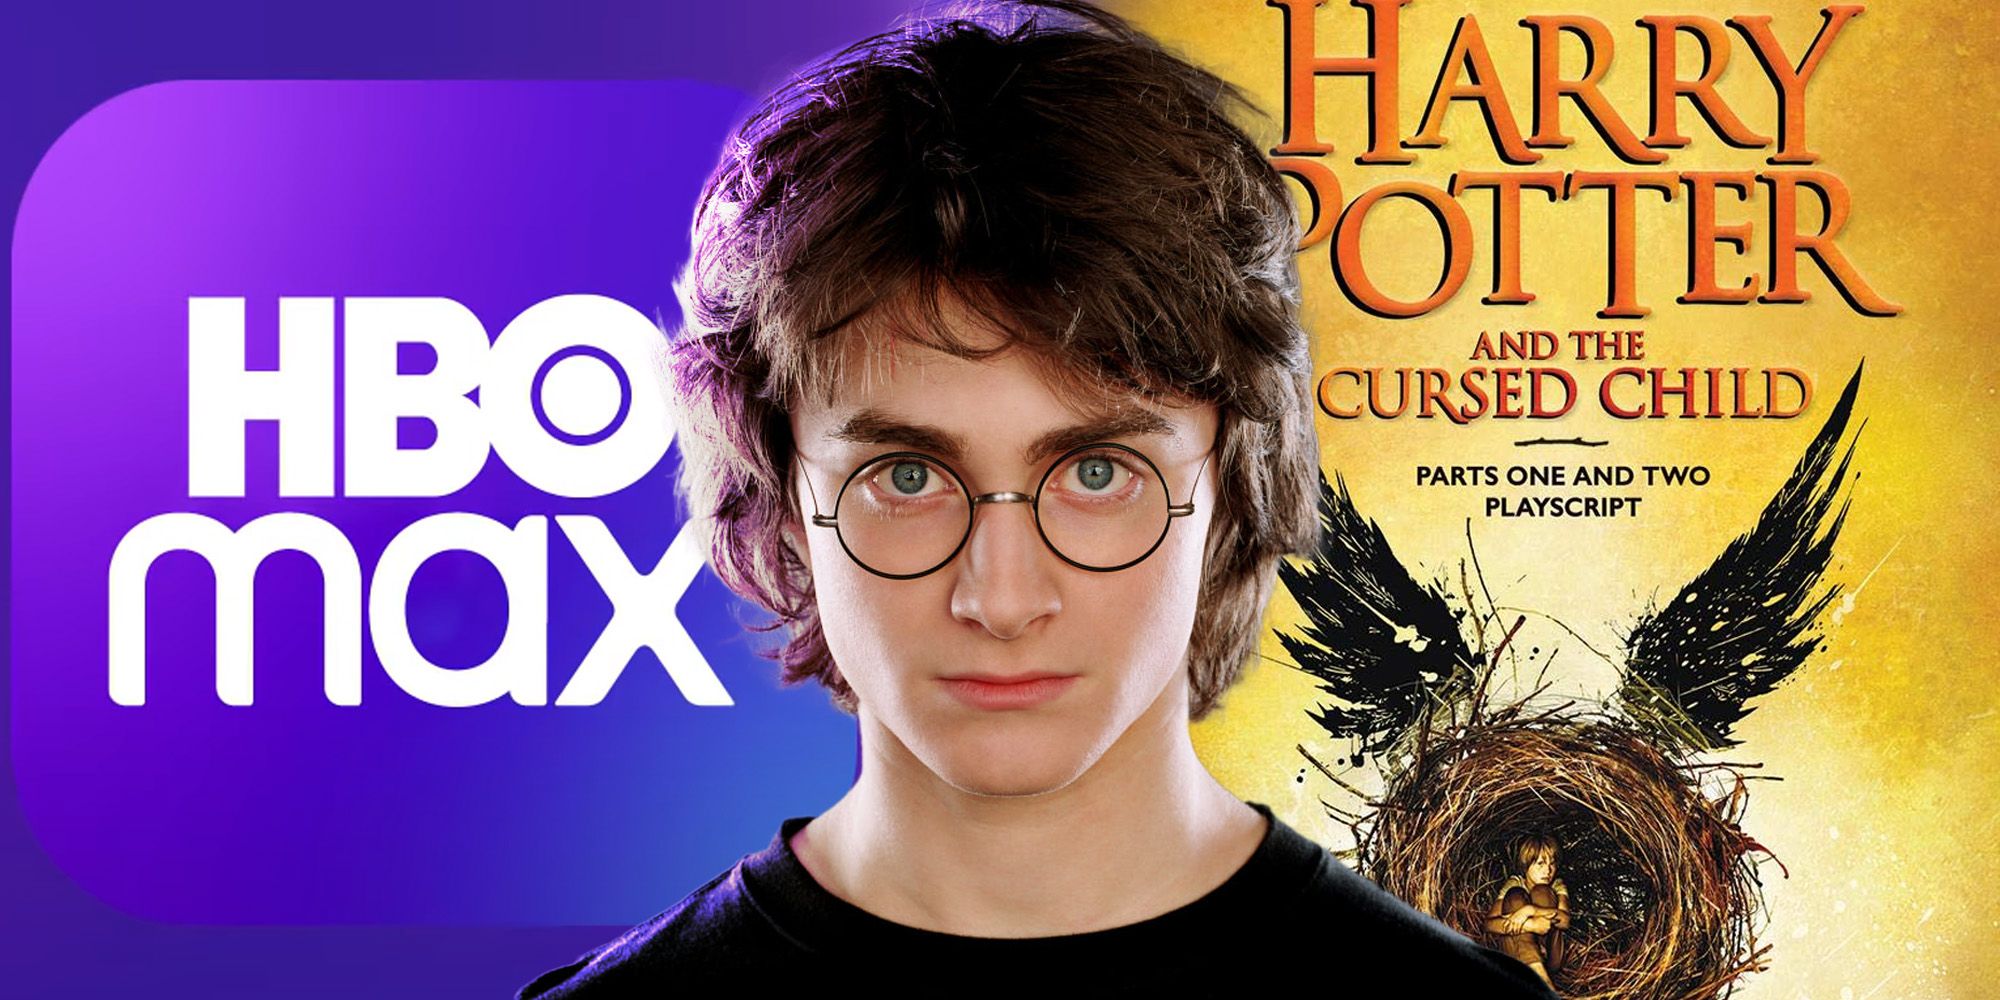 Harry potter HBO max the cursed child